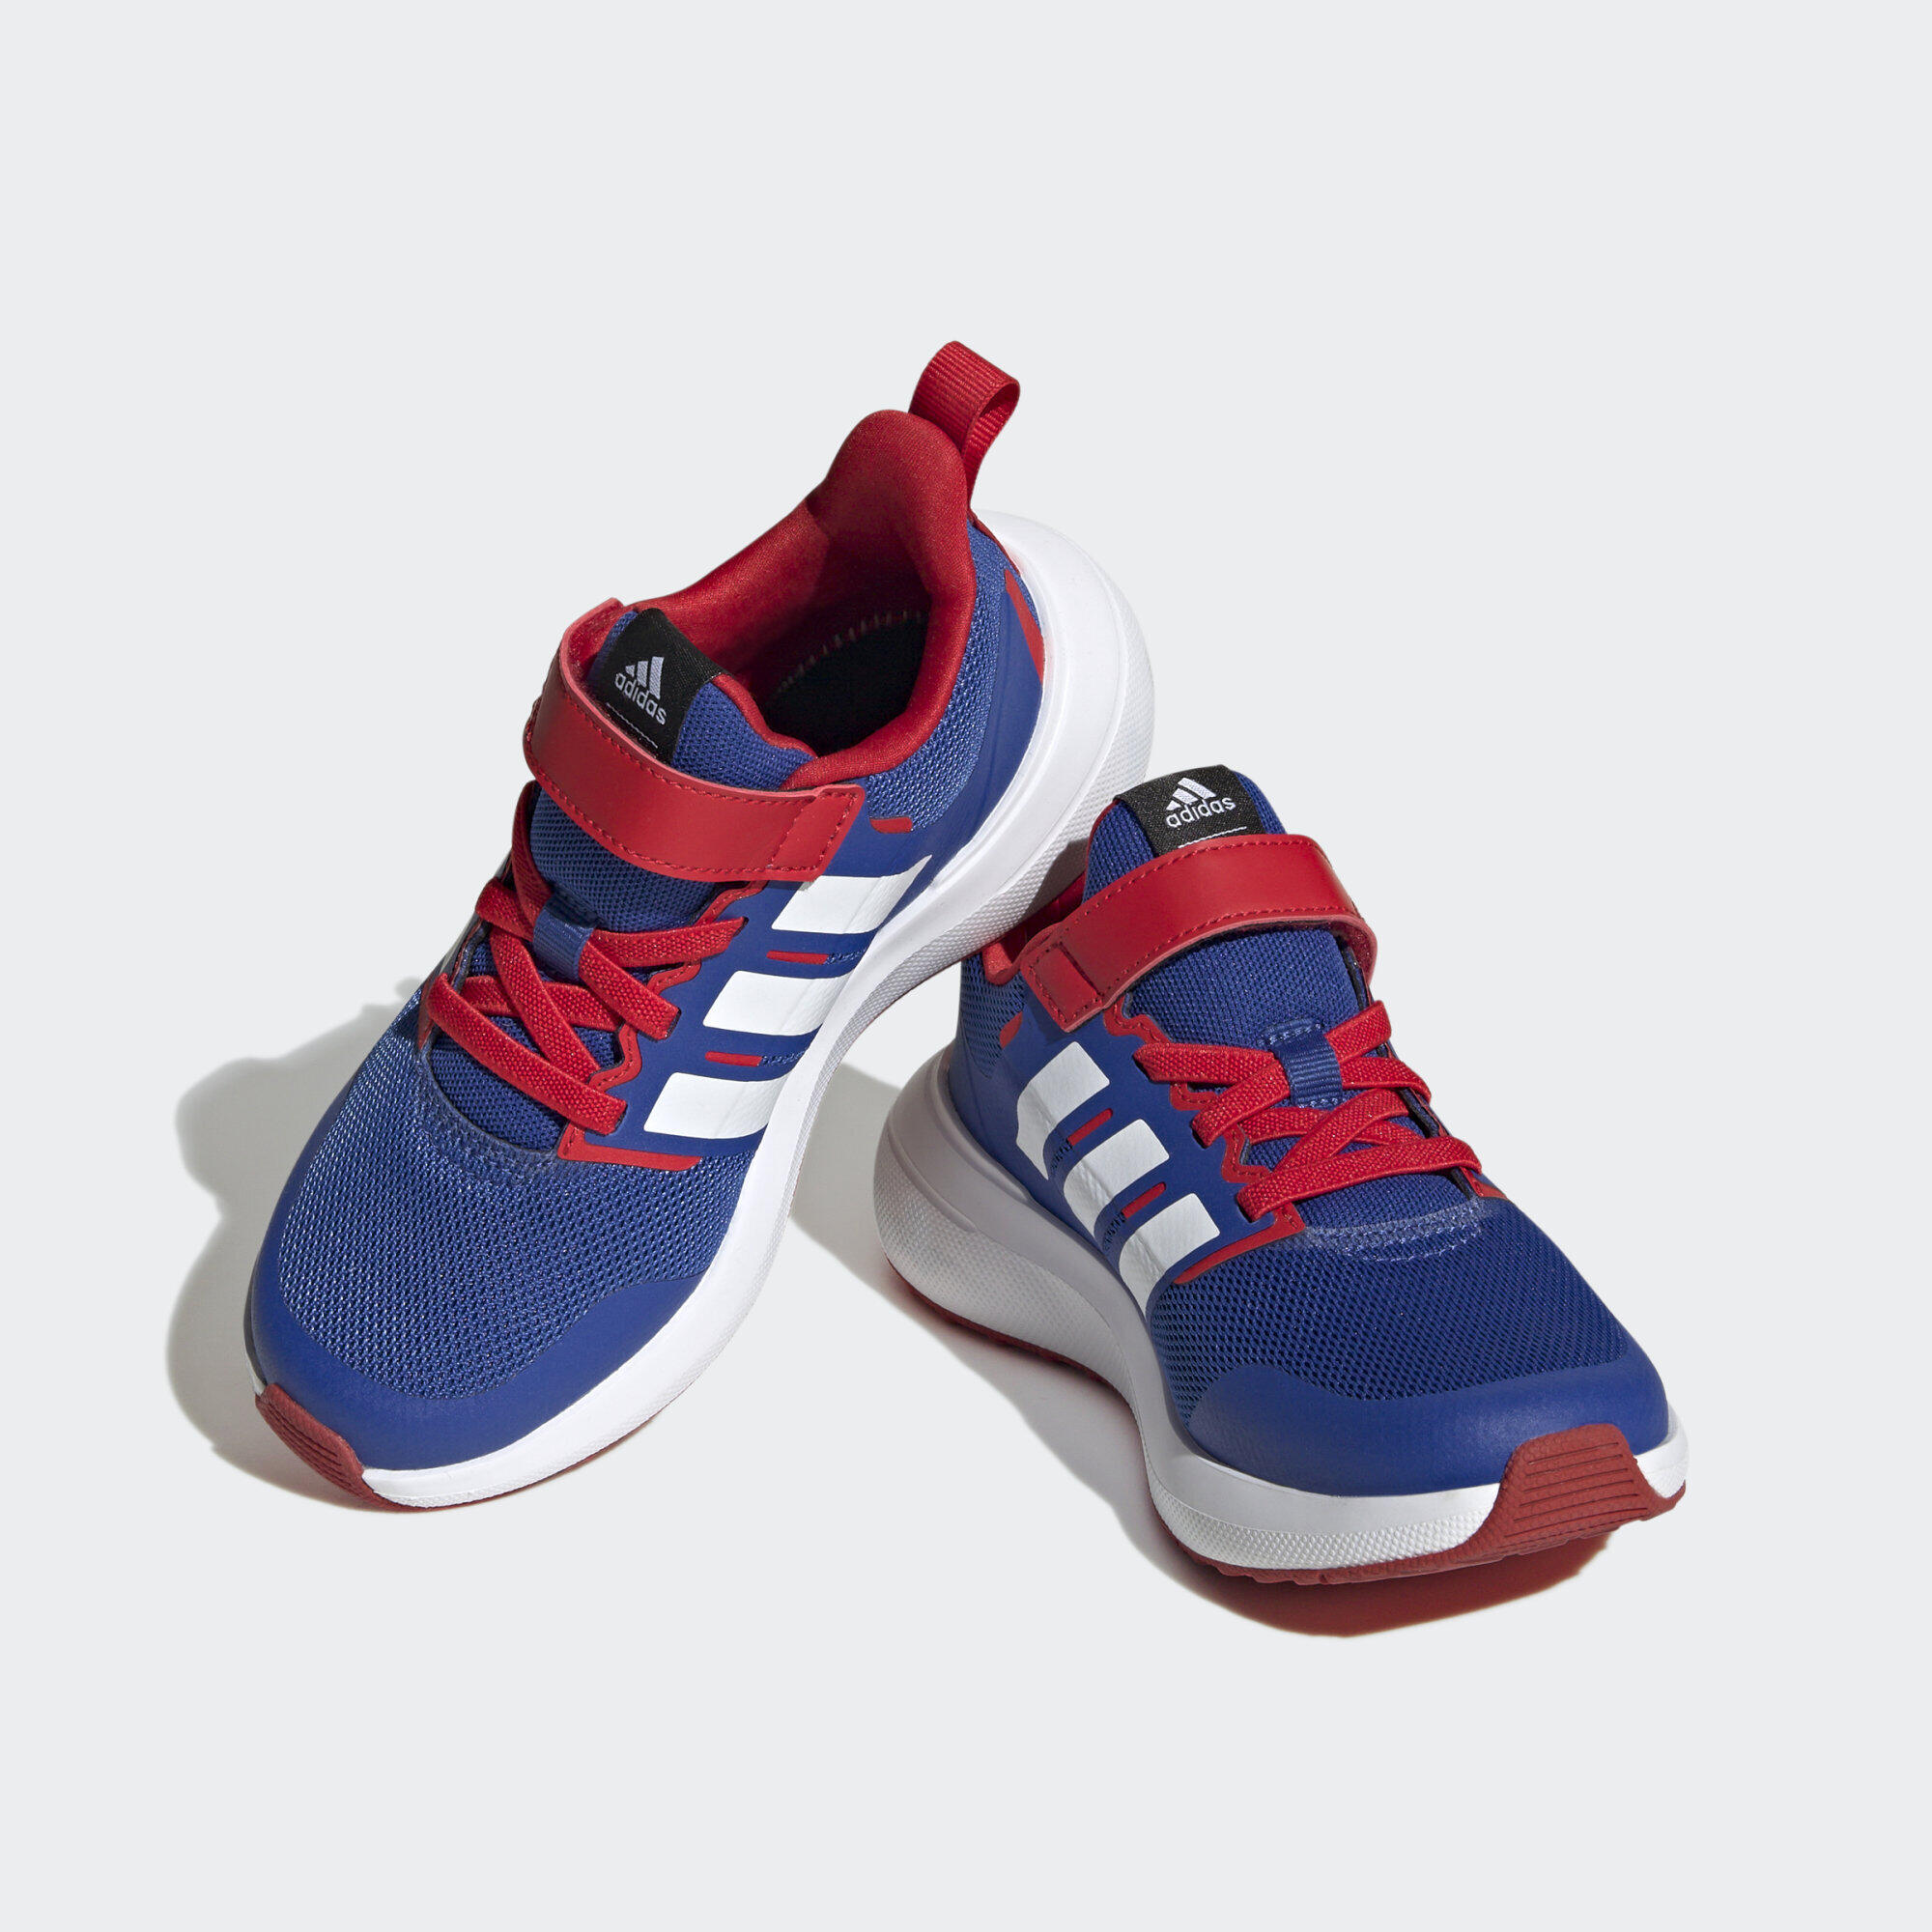 adidas x Marvel FortaRun Spider-Man 2.0 Cloudfoam Sport Lace Top Strap Shoes 5/7